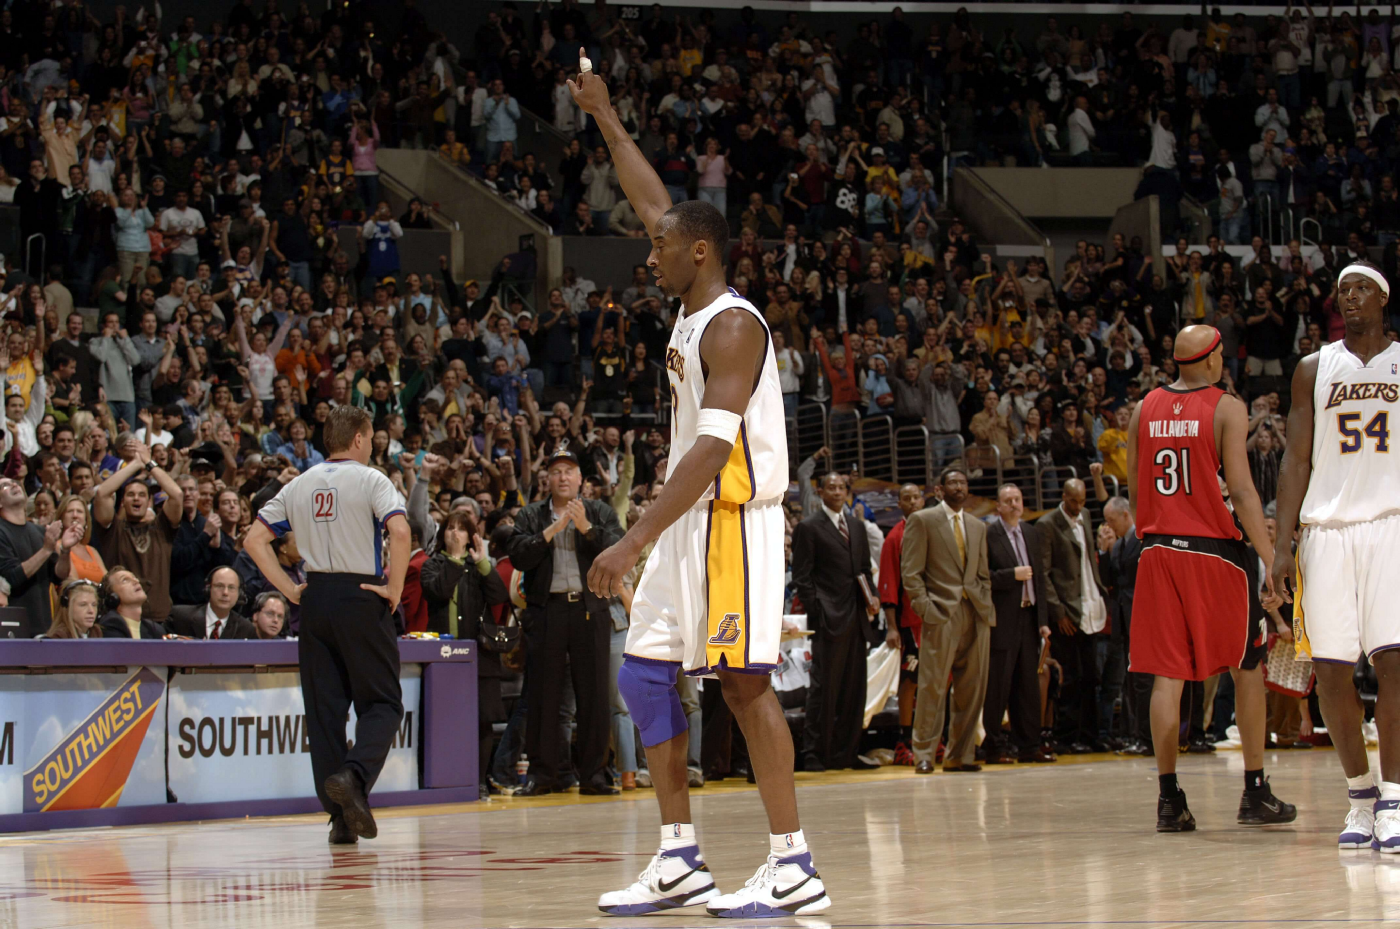 January 22, 2006 – The Day Kobe Bryant Scored 81 Points To Become an NBA Legend